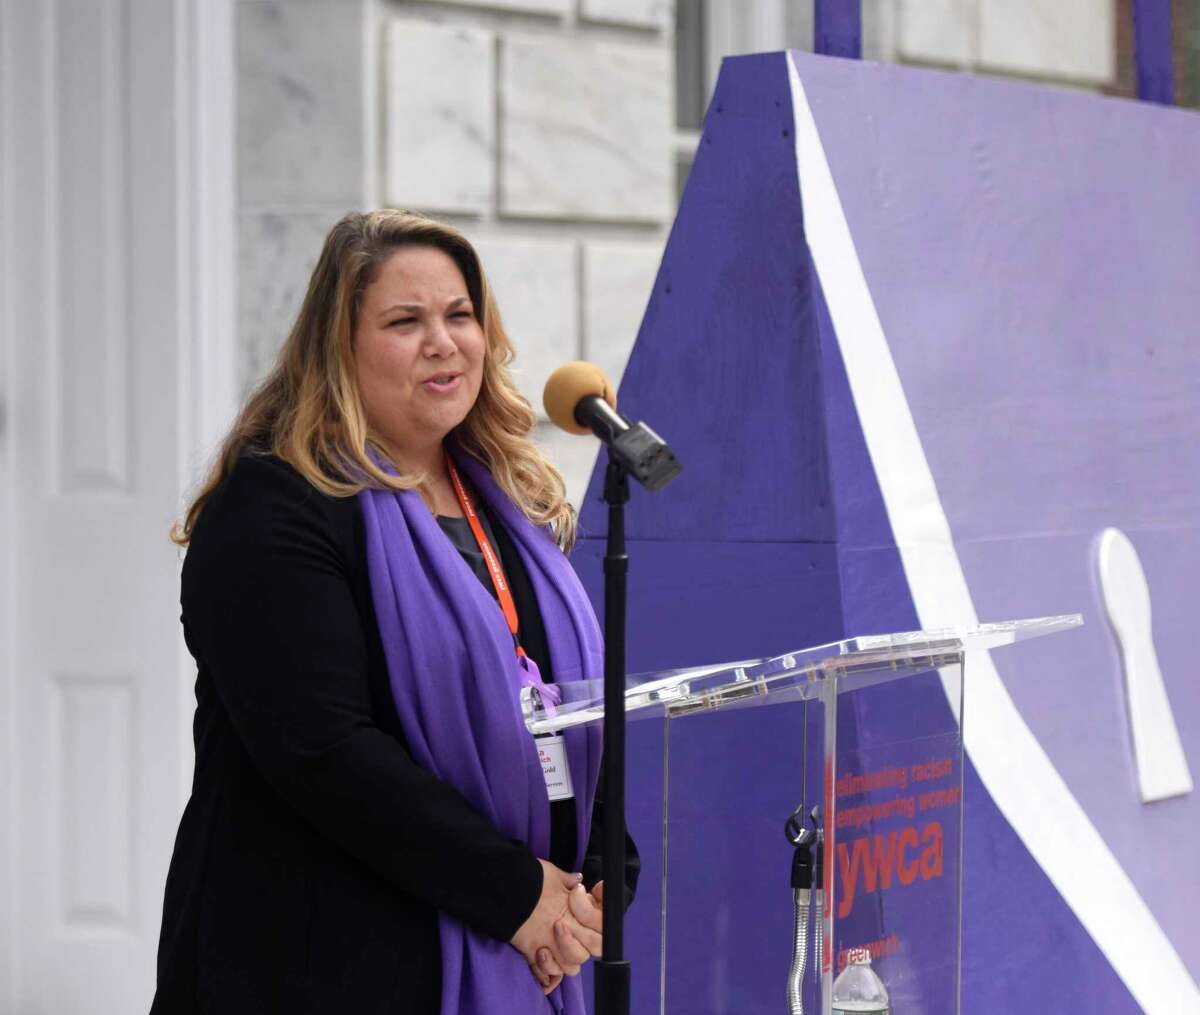 YWCA Greenwich Director of Domestic Abuse Services Meredith Gold speaks during the Domestic Violence Awareness and Prevention Month Kickoff at Town Hall in Greenwich, Conn. Tuesday, Oct. 2, 2018.